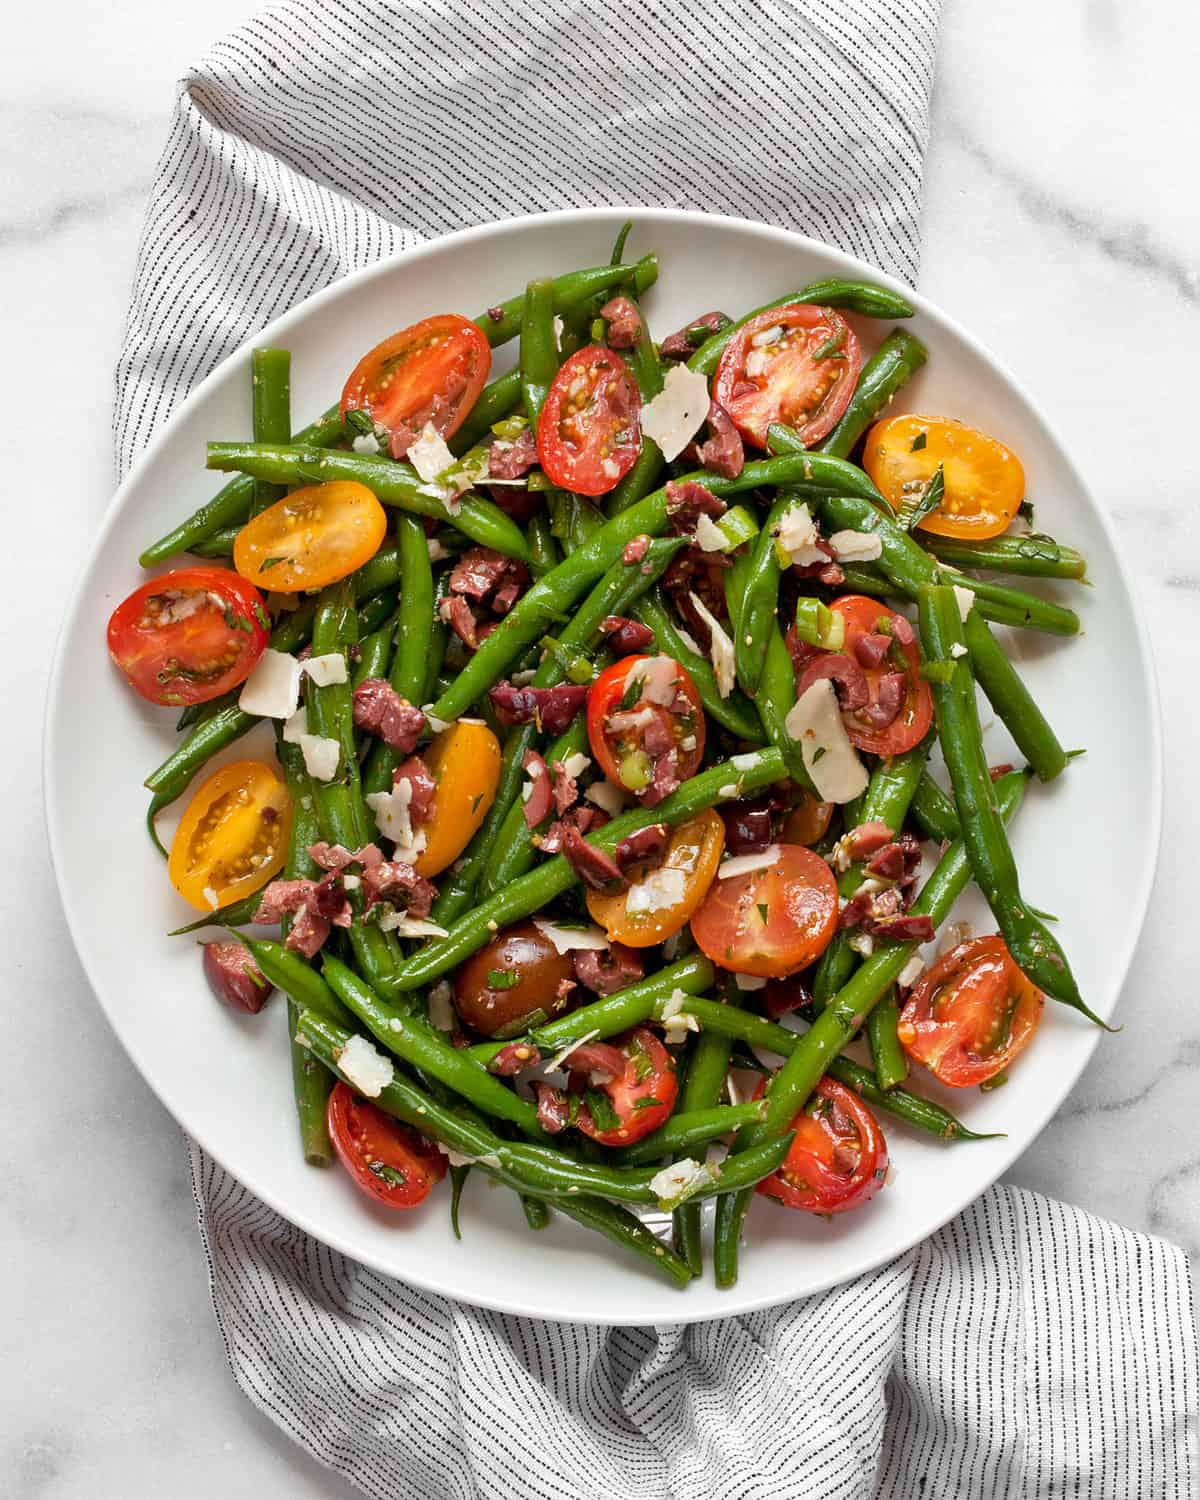 Tomato, olive, green bean salad on a plate.